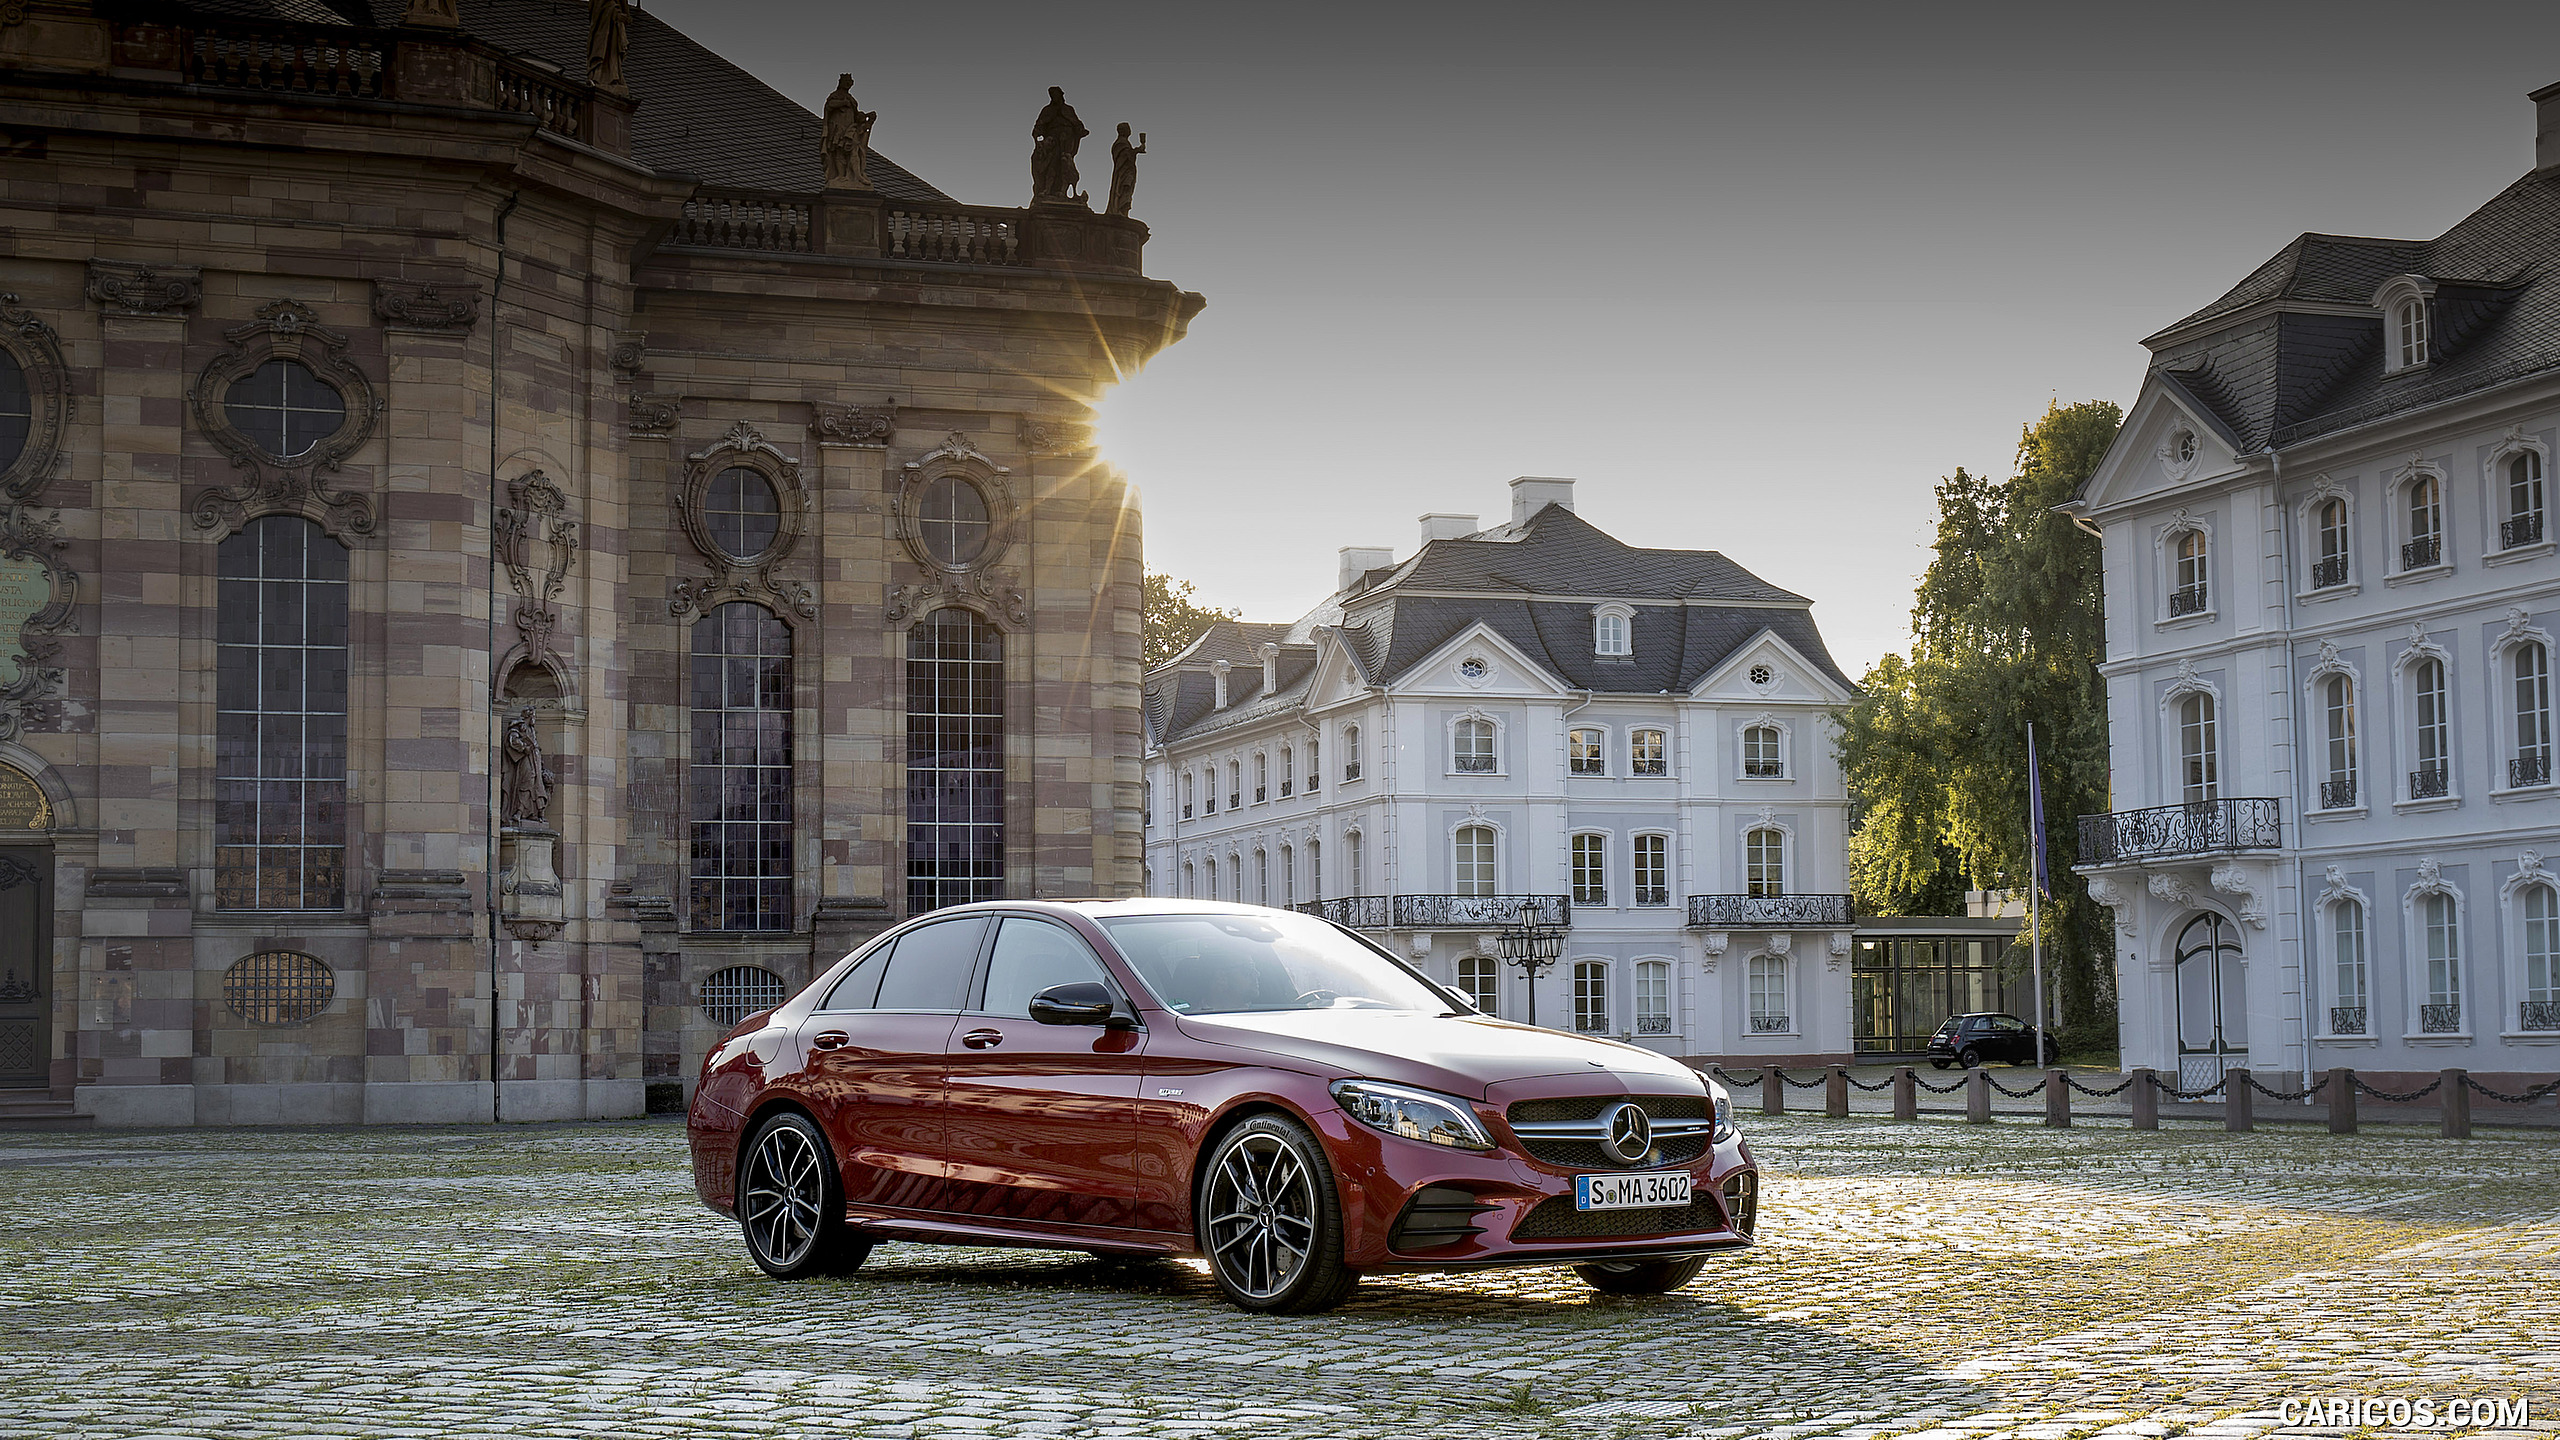 2019 Mercedes-AMG C43 4MATIC Sedan (Color: Hyacinth Red) - Front Three-Quarter, #59 of 192